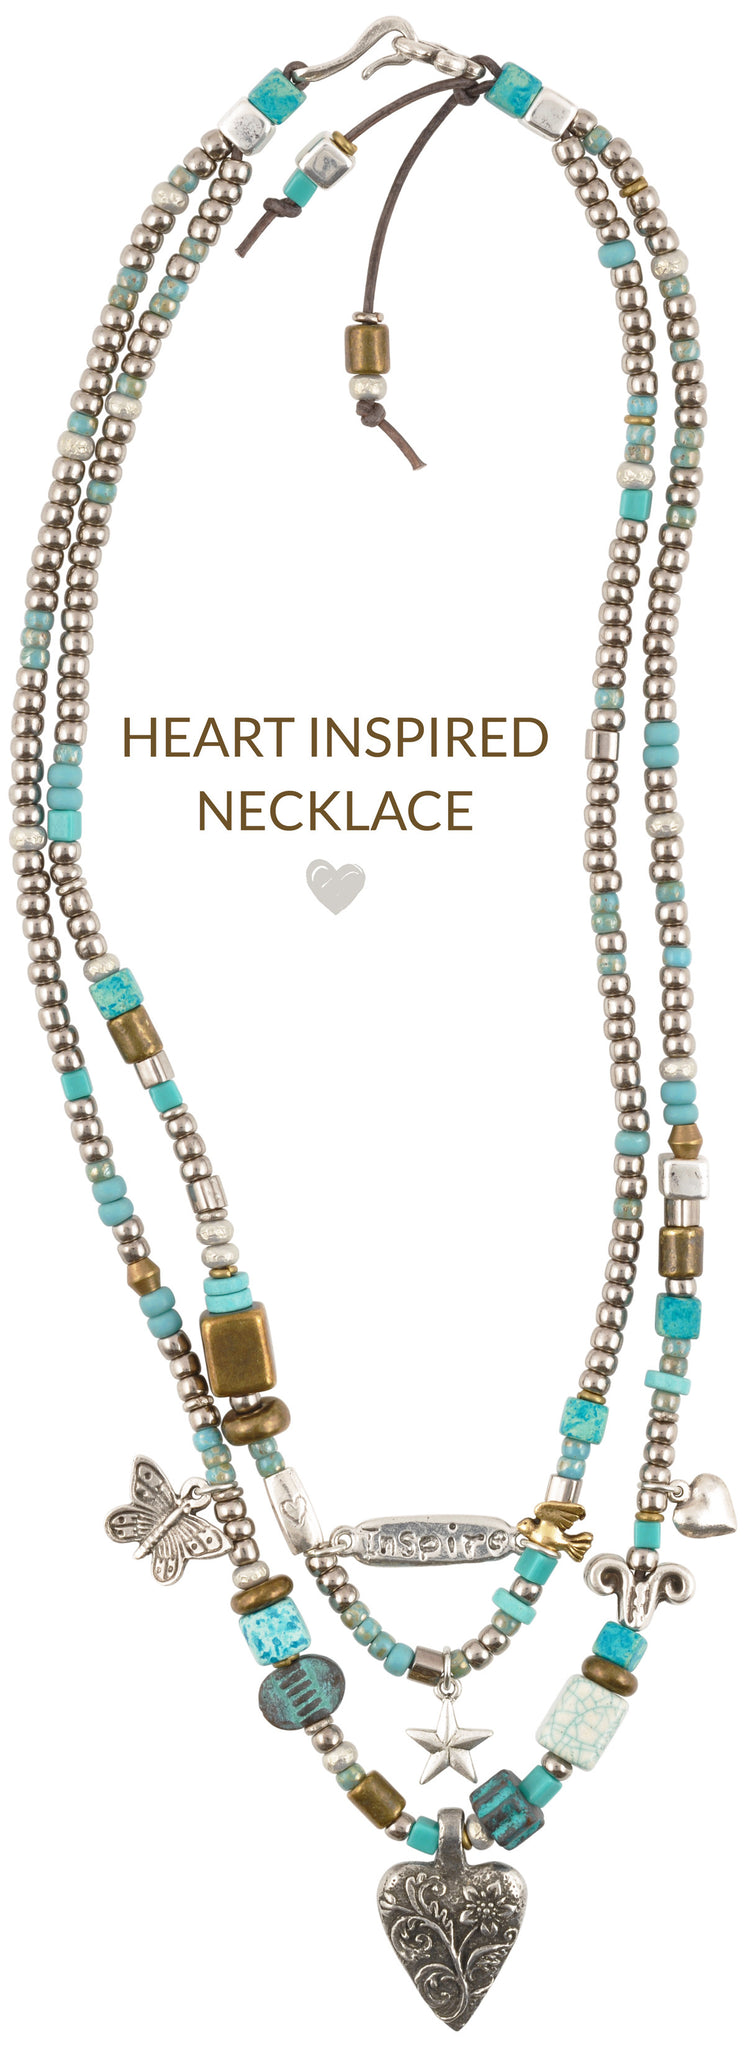 Heart Inspired Leather Necklace Blog choiyeonhee